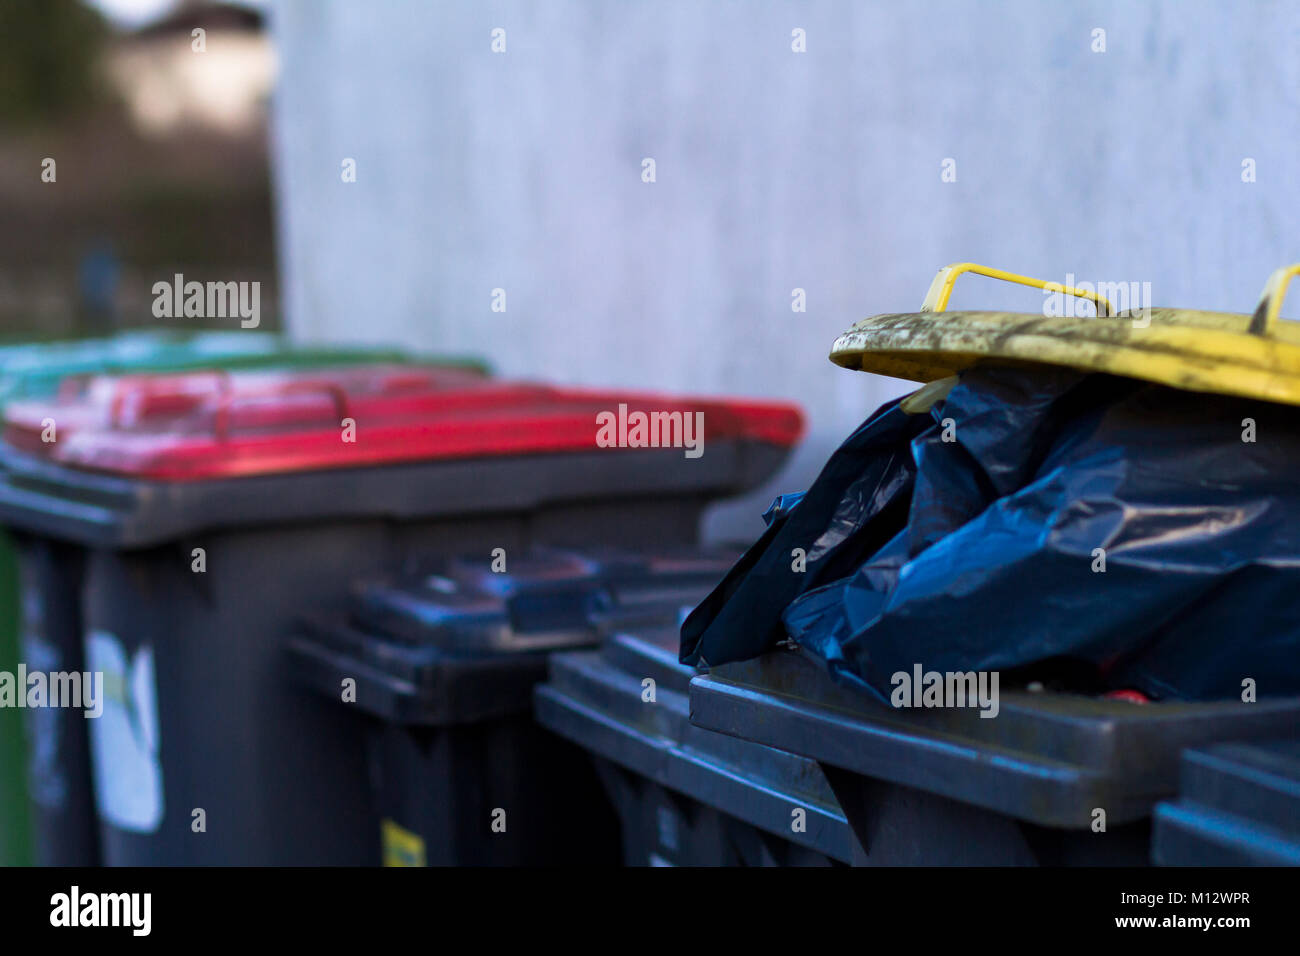 Row of overflowing rubbish bins with different colored lids and black bags of refuse. Stock Photo